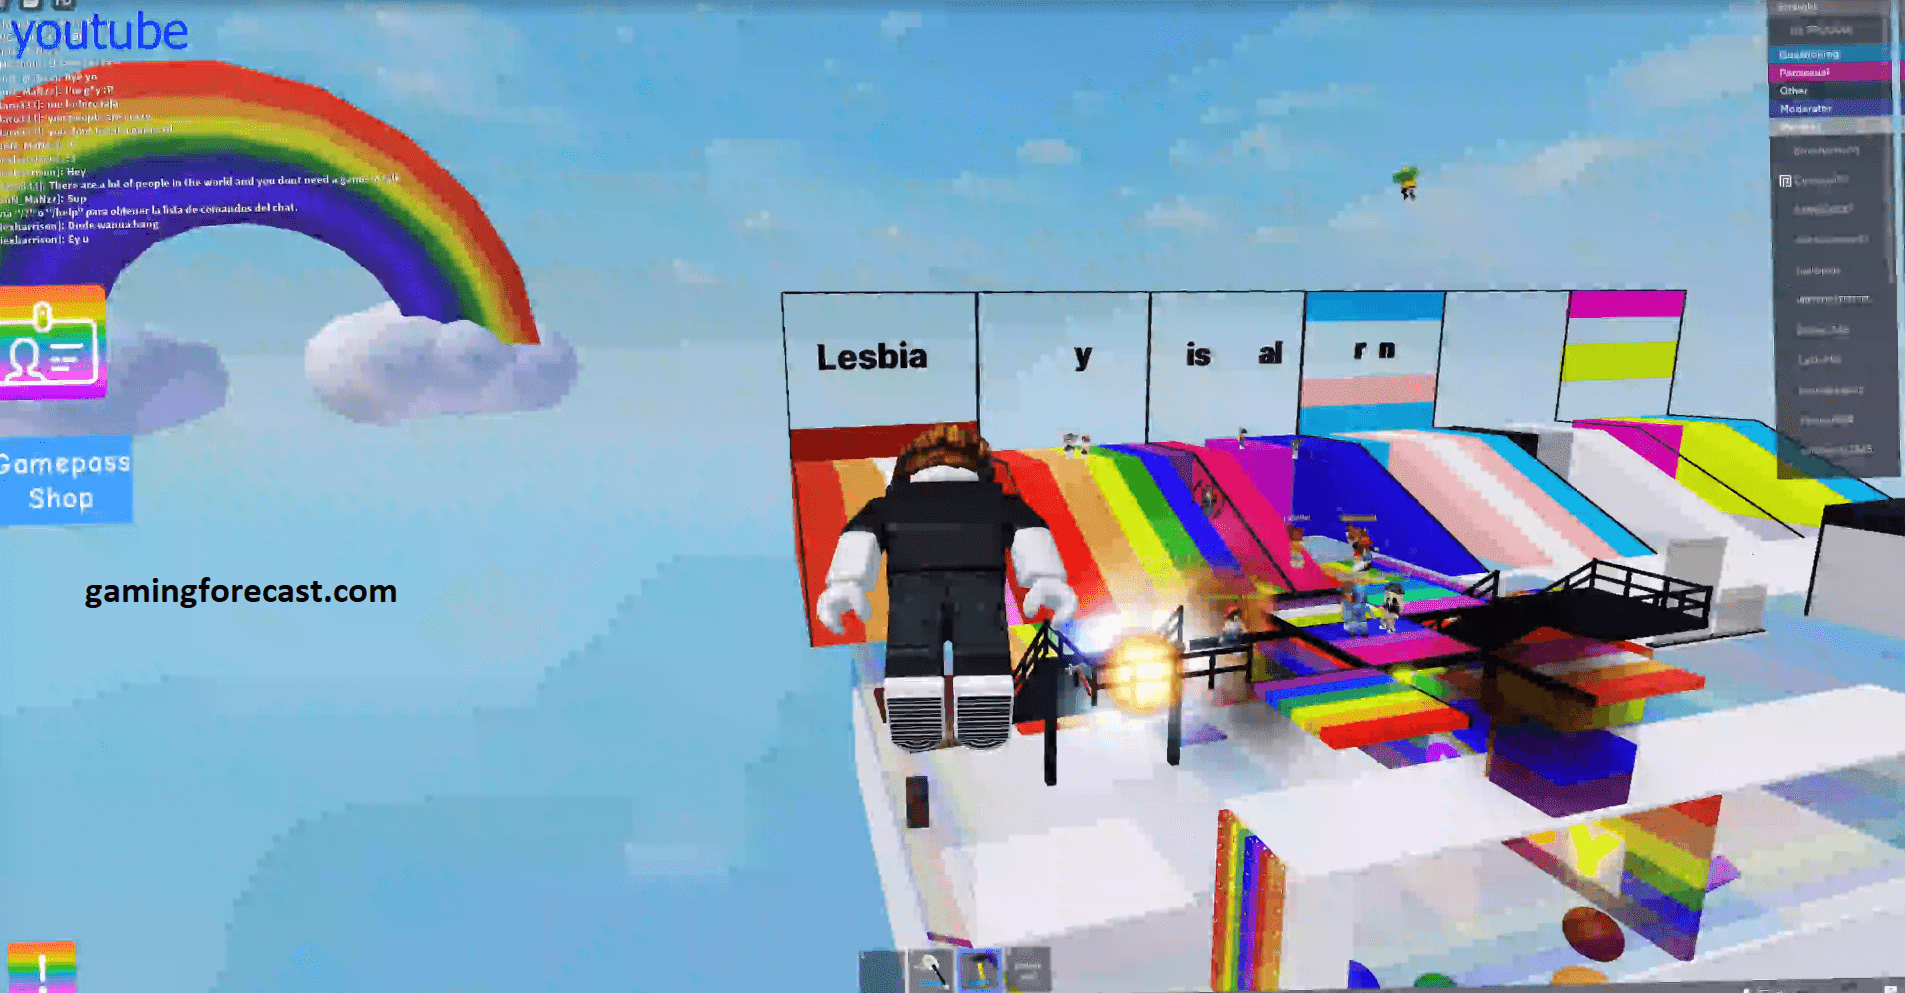 Roblox Hack Download Pc Destroy Lobby Fly Aimbot Scripts 2021 Gaming Forecast Download Free Online Game Hacks - roblox hackers flying in game